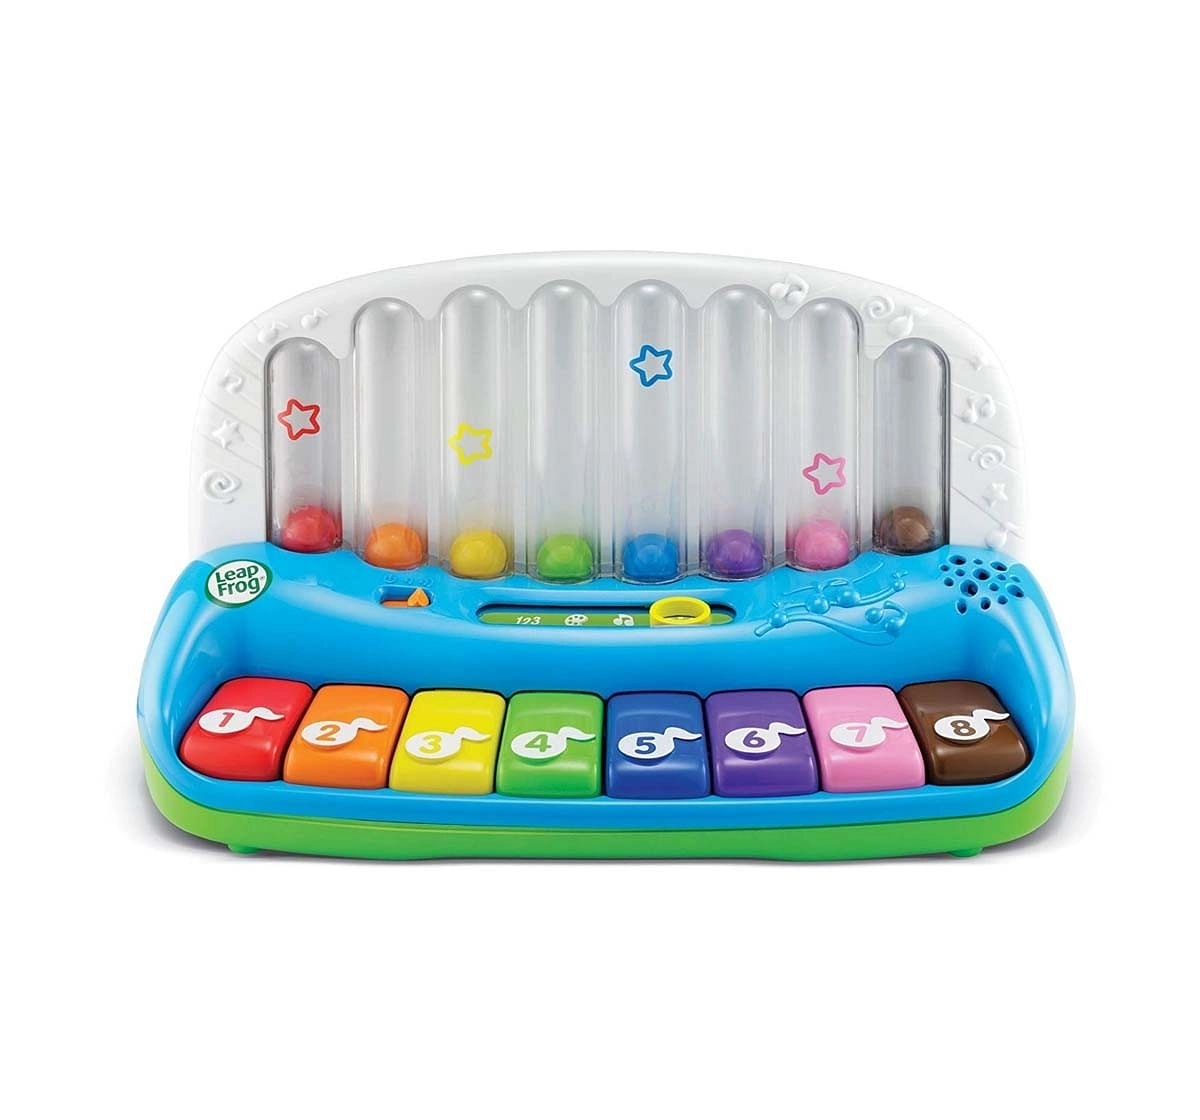 Leapfrog Poppin Play Piano Learning Toys for Kids age 12M+ 